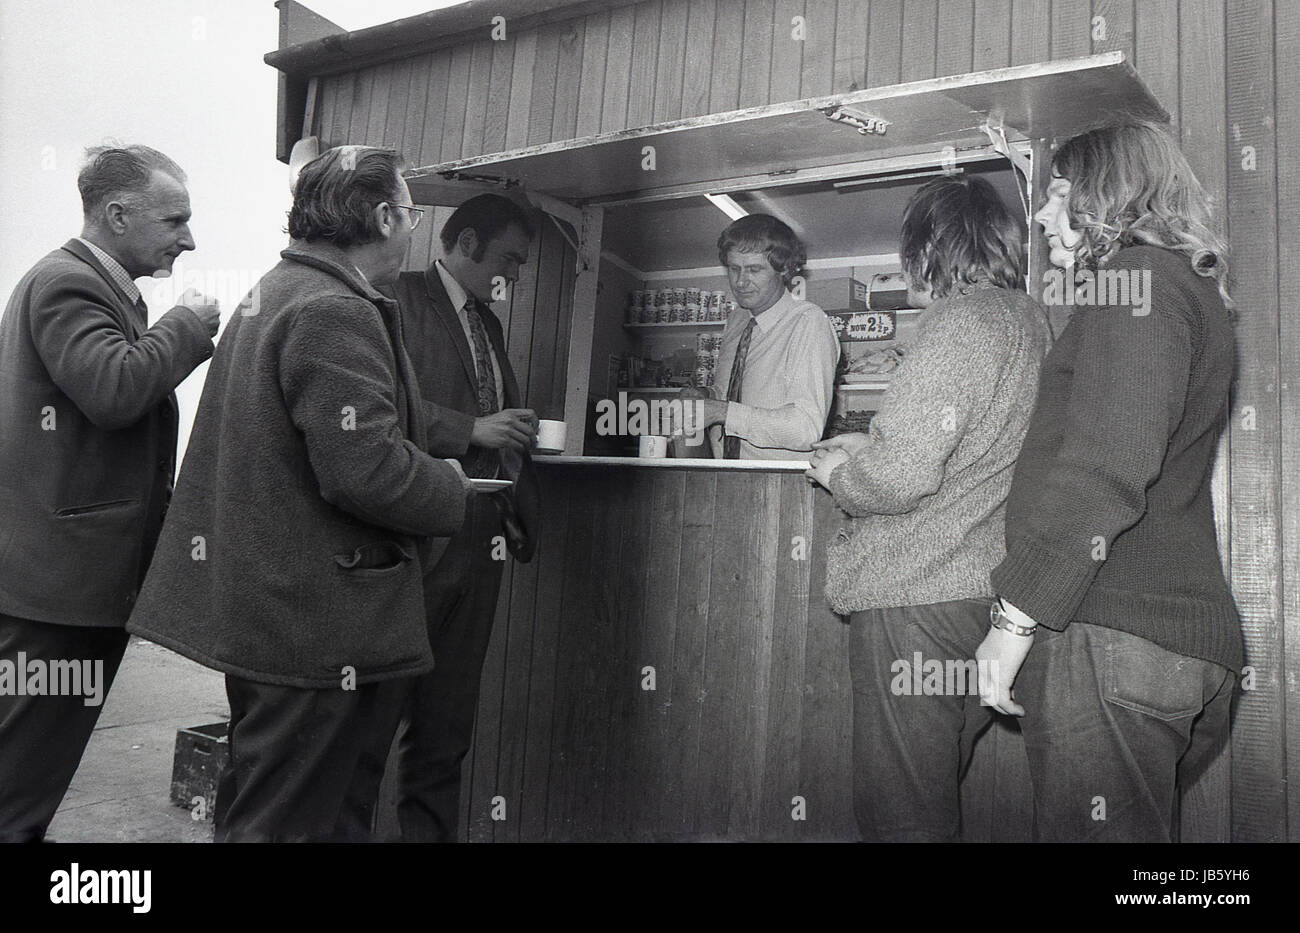 1973, historical picture, customers standing at the counter outside the famous Blackheath Tea Hut. A simple, basic snack bar, the small wooden hut with a service hatch for light food and beverages was a well known rest stop for people travelling on the A2 road at Greenwich, South London, SE3. An opportunity for a break, a cup of tea and some social interaction on one's journey. Stock Photo